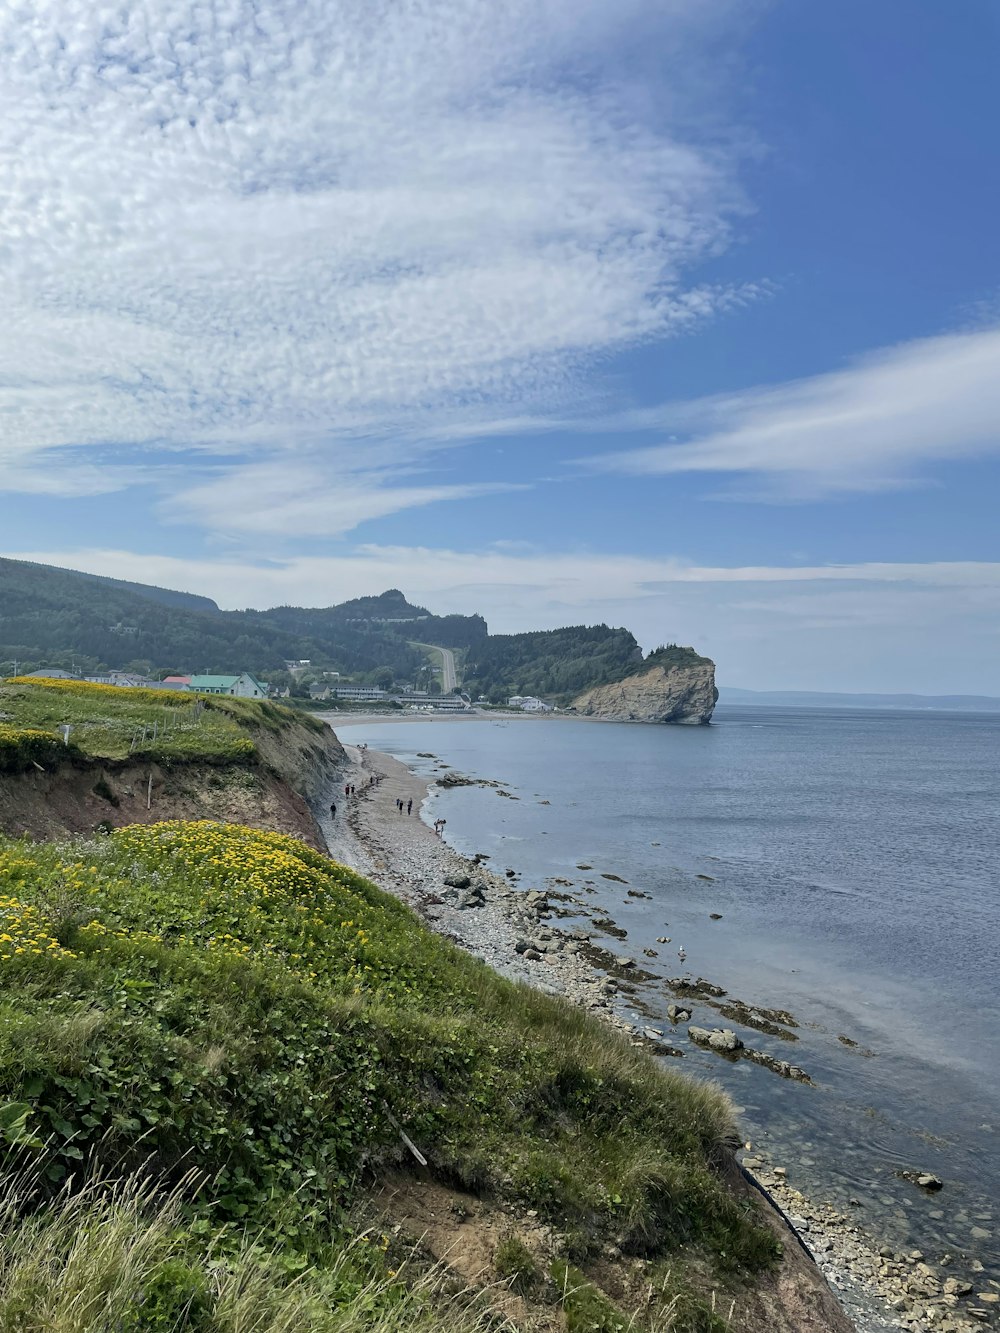 a scenic view of a beach with a cliff in the background